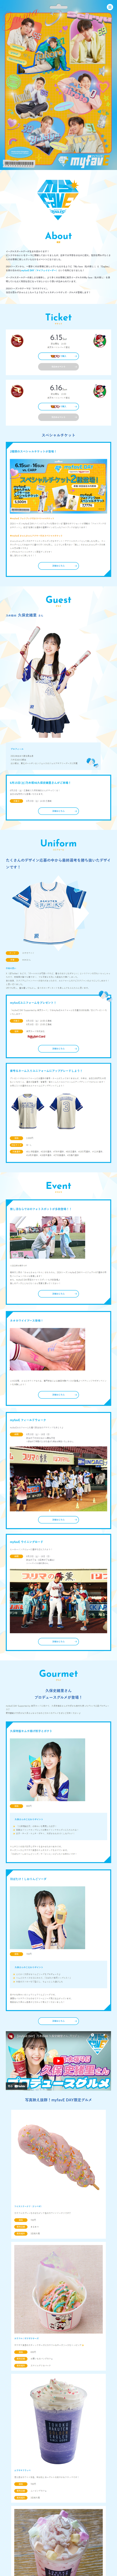 myfavE DAY特設サイト_sp_1